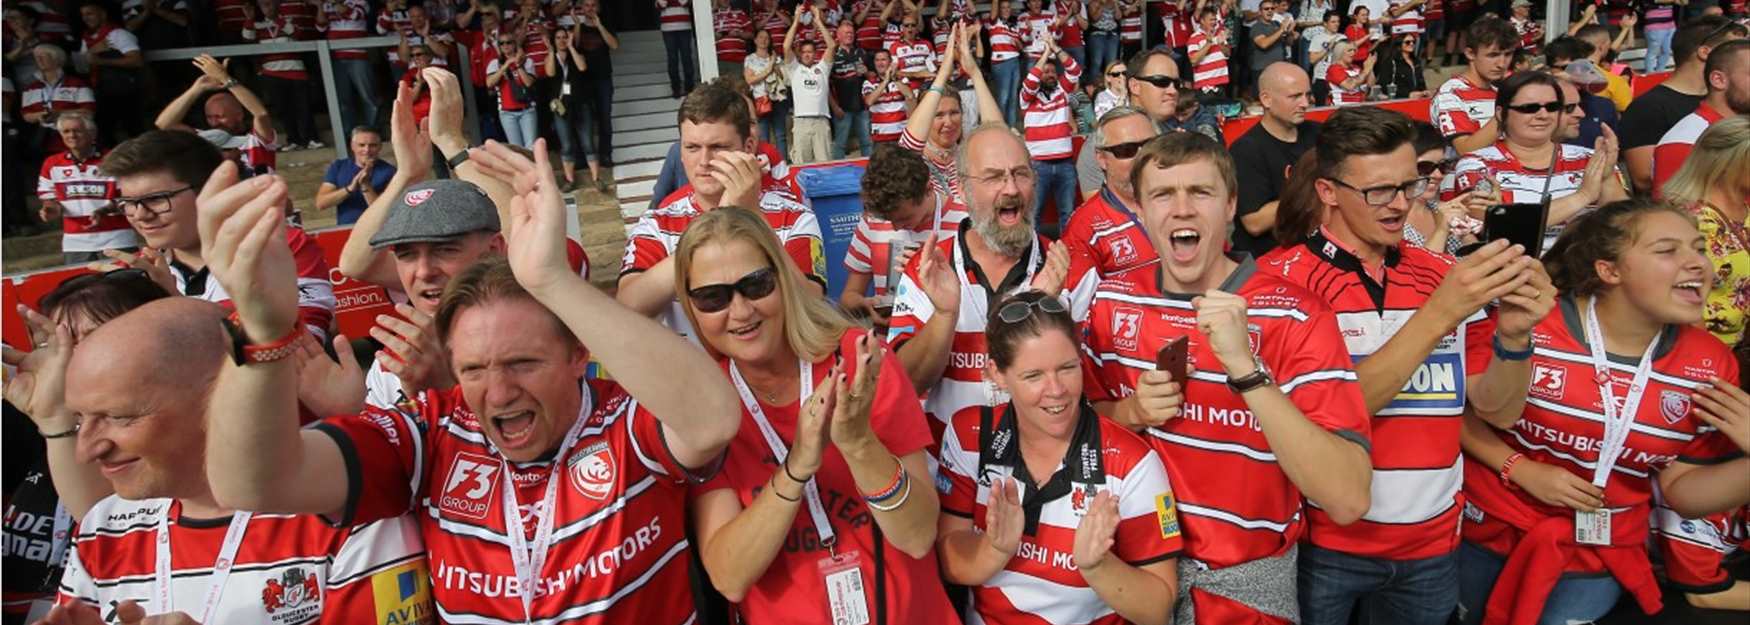 Gloucester Saints rugby